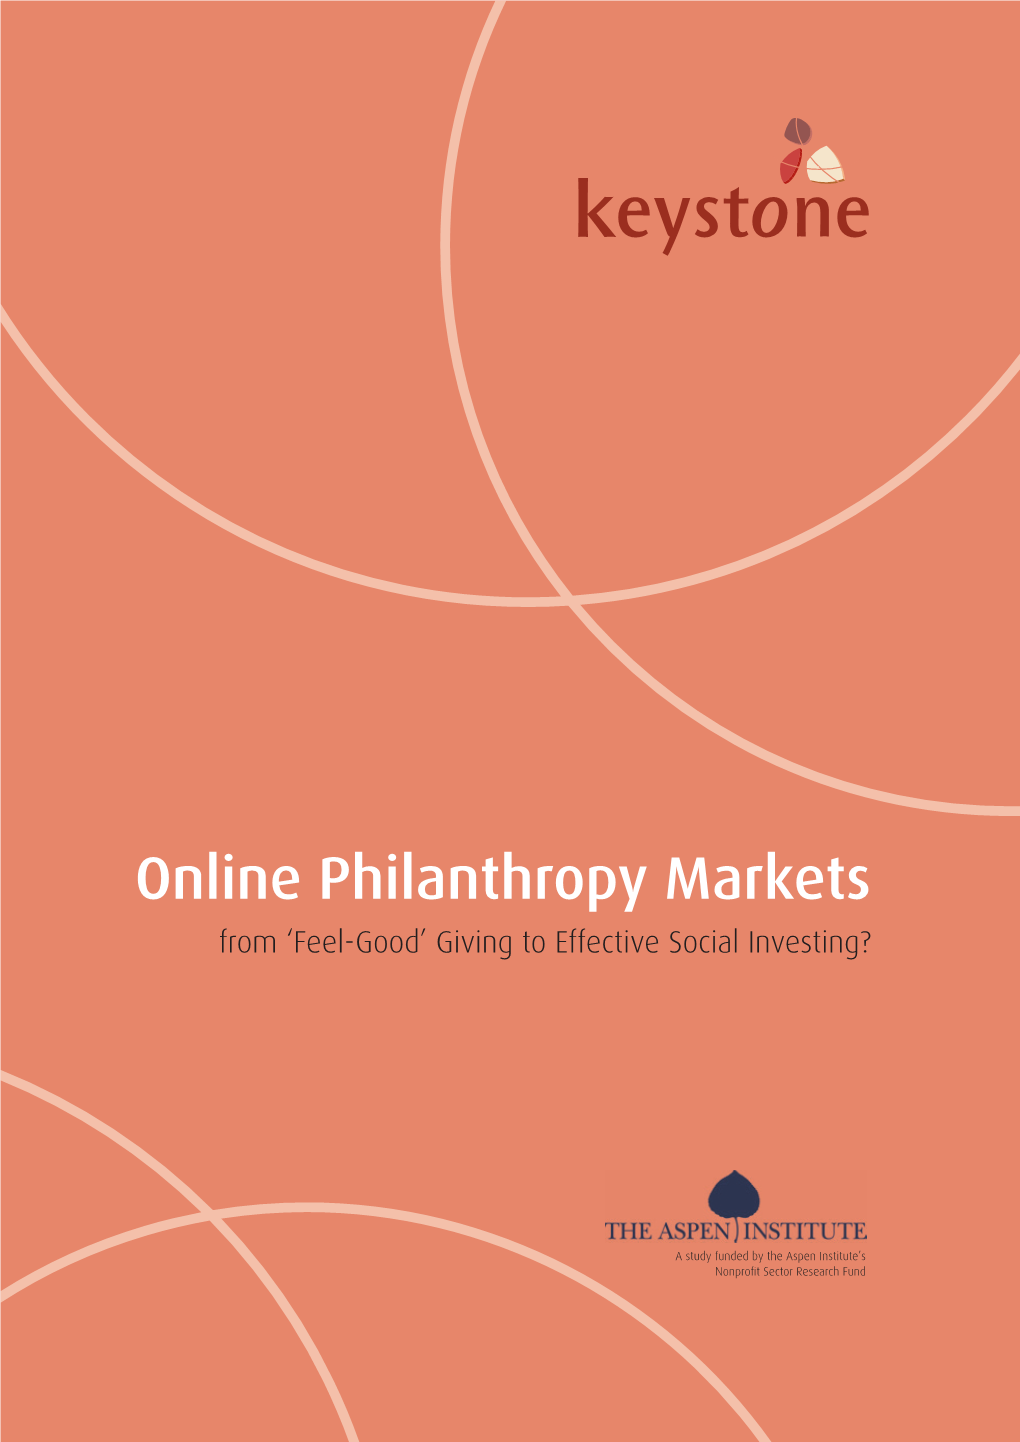 Online Philanthropy Markets from ‘Feel-Good’ Giving to Effective Social Investing?